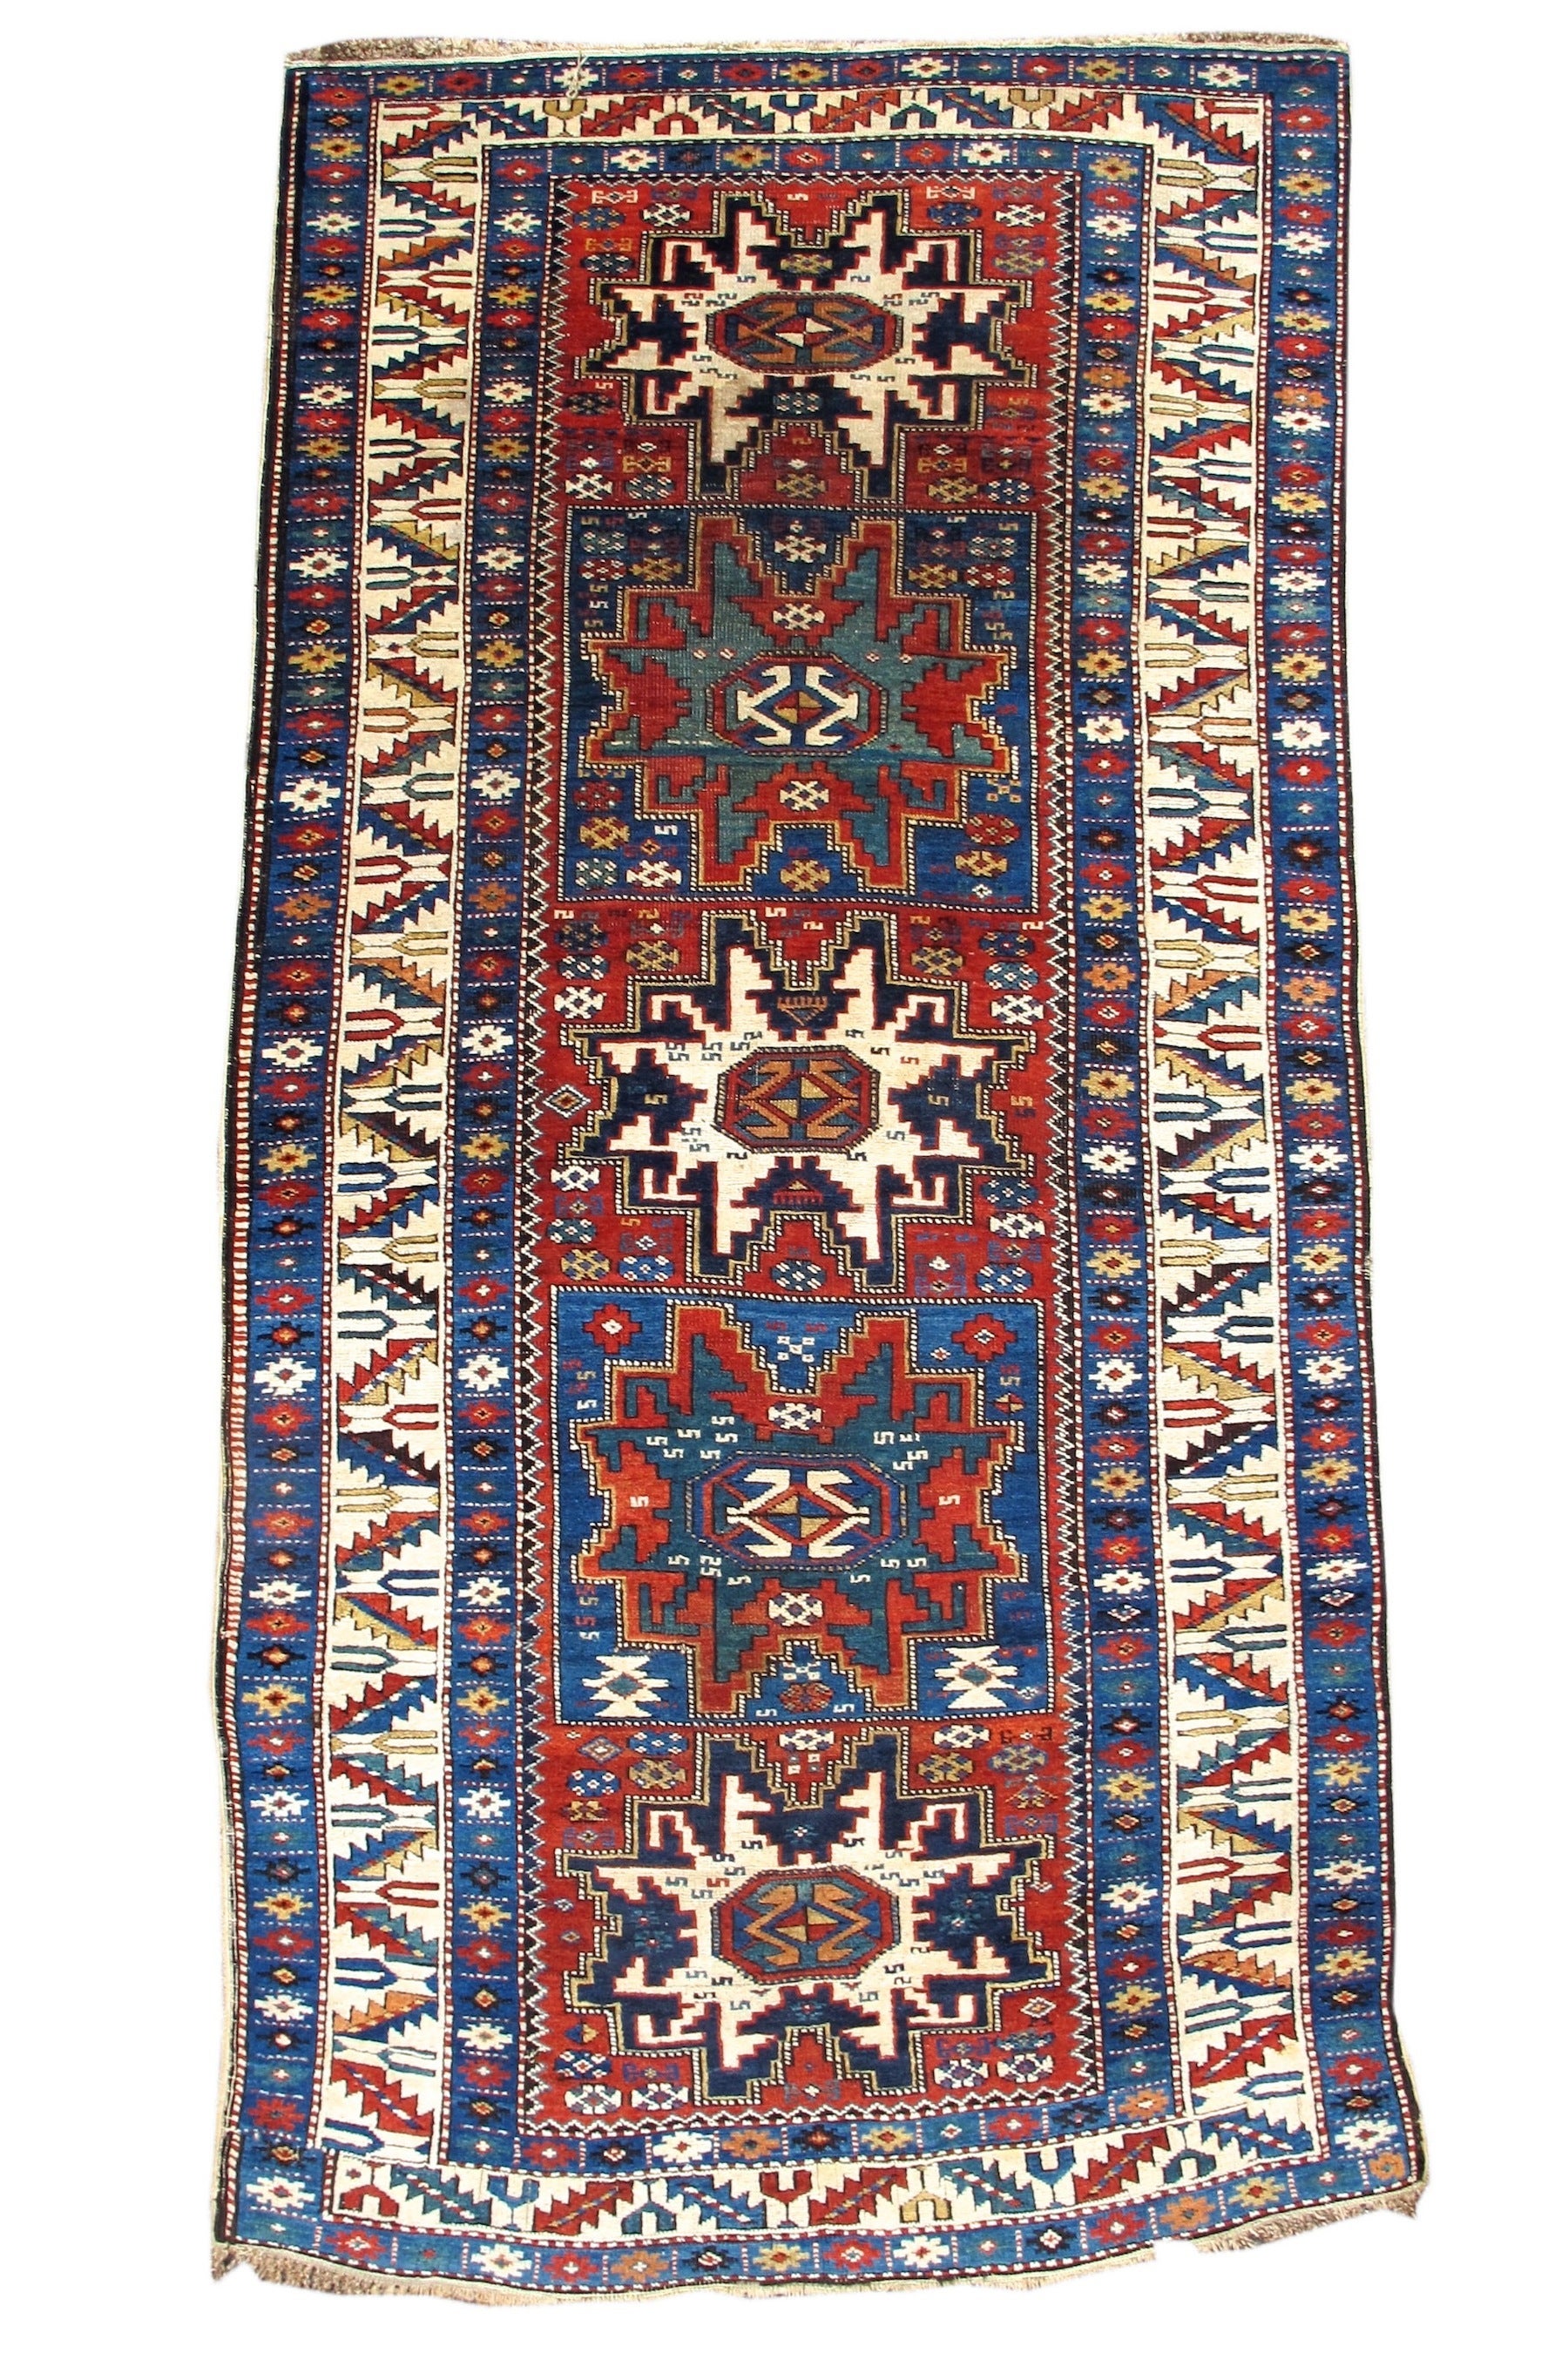 Late 19th Century Varied Red and Blue Lesghi Star Kuba Rug